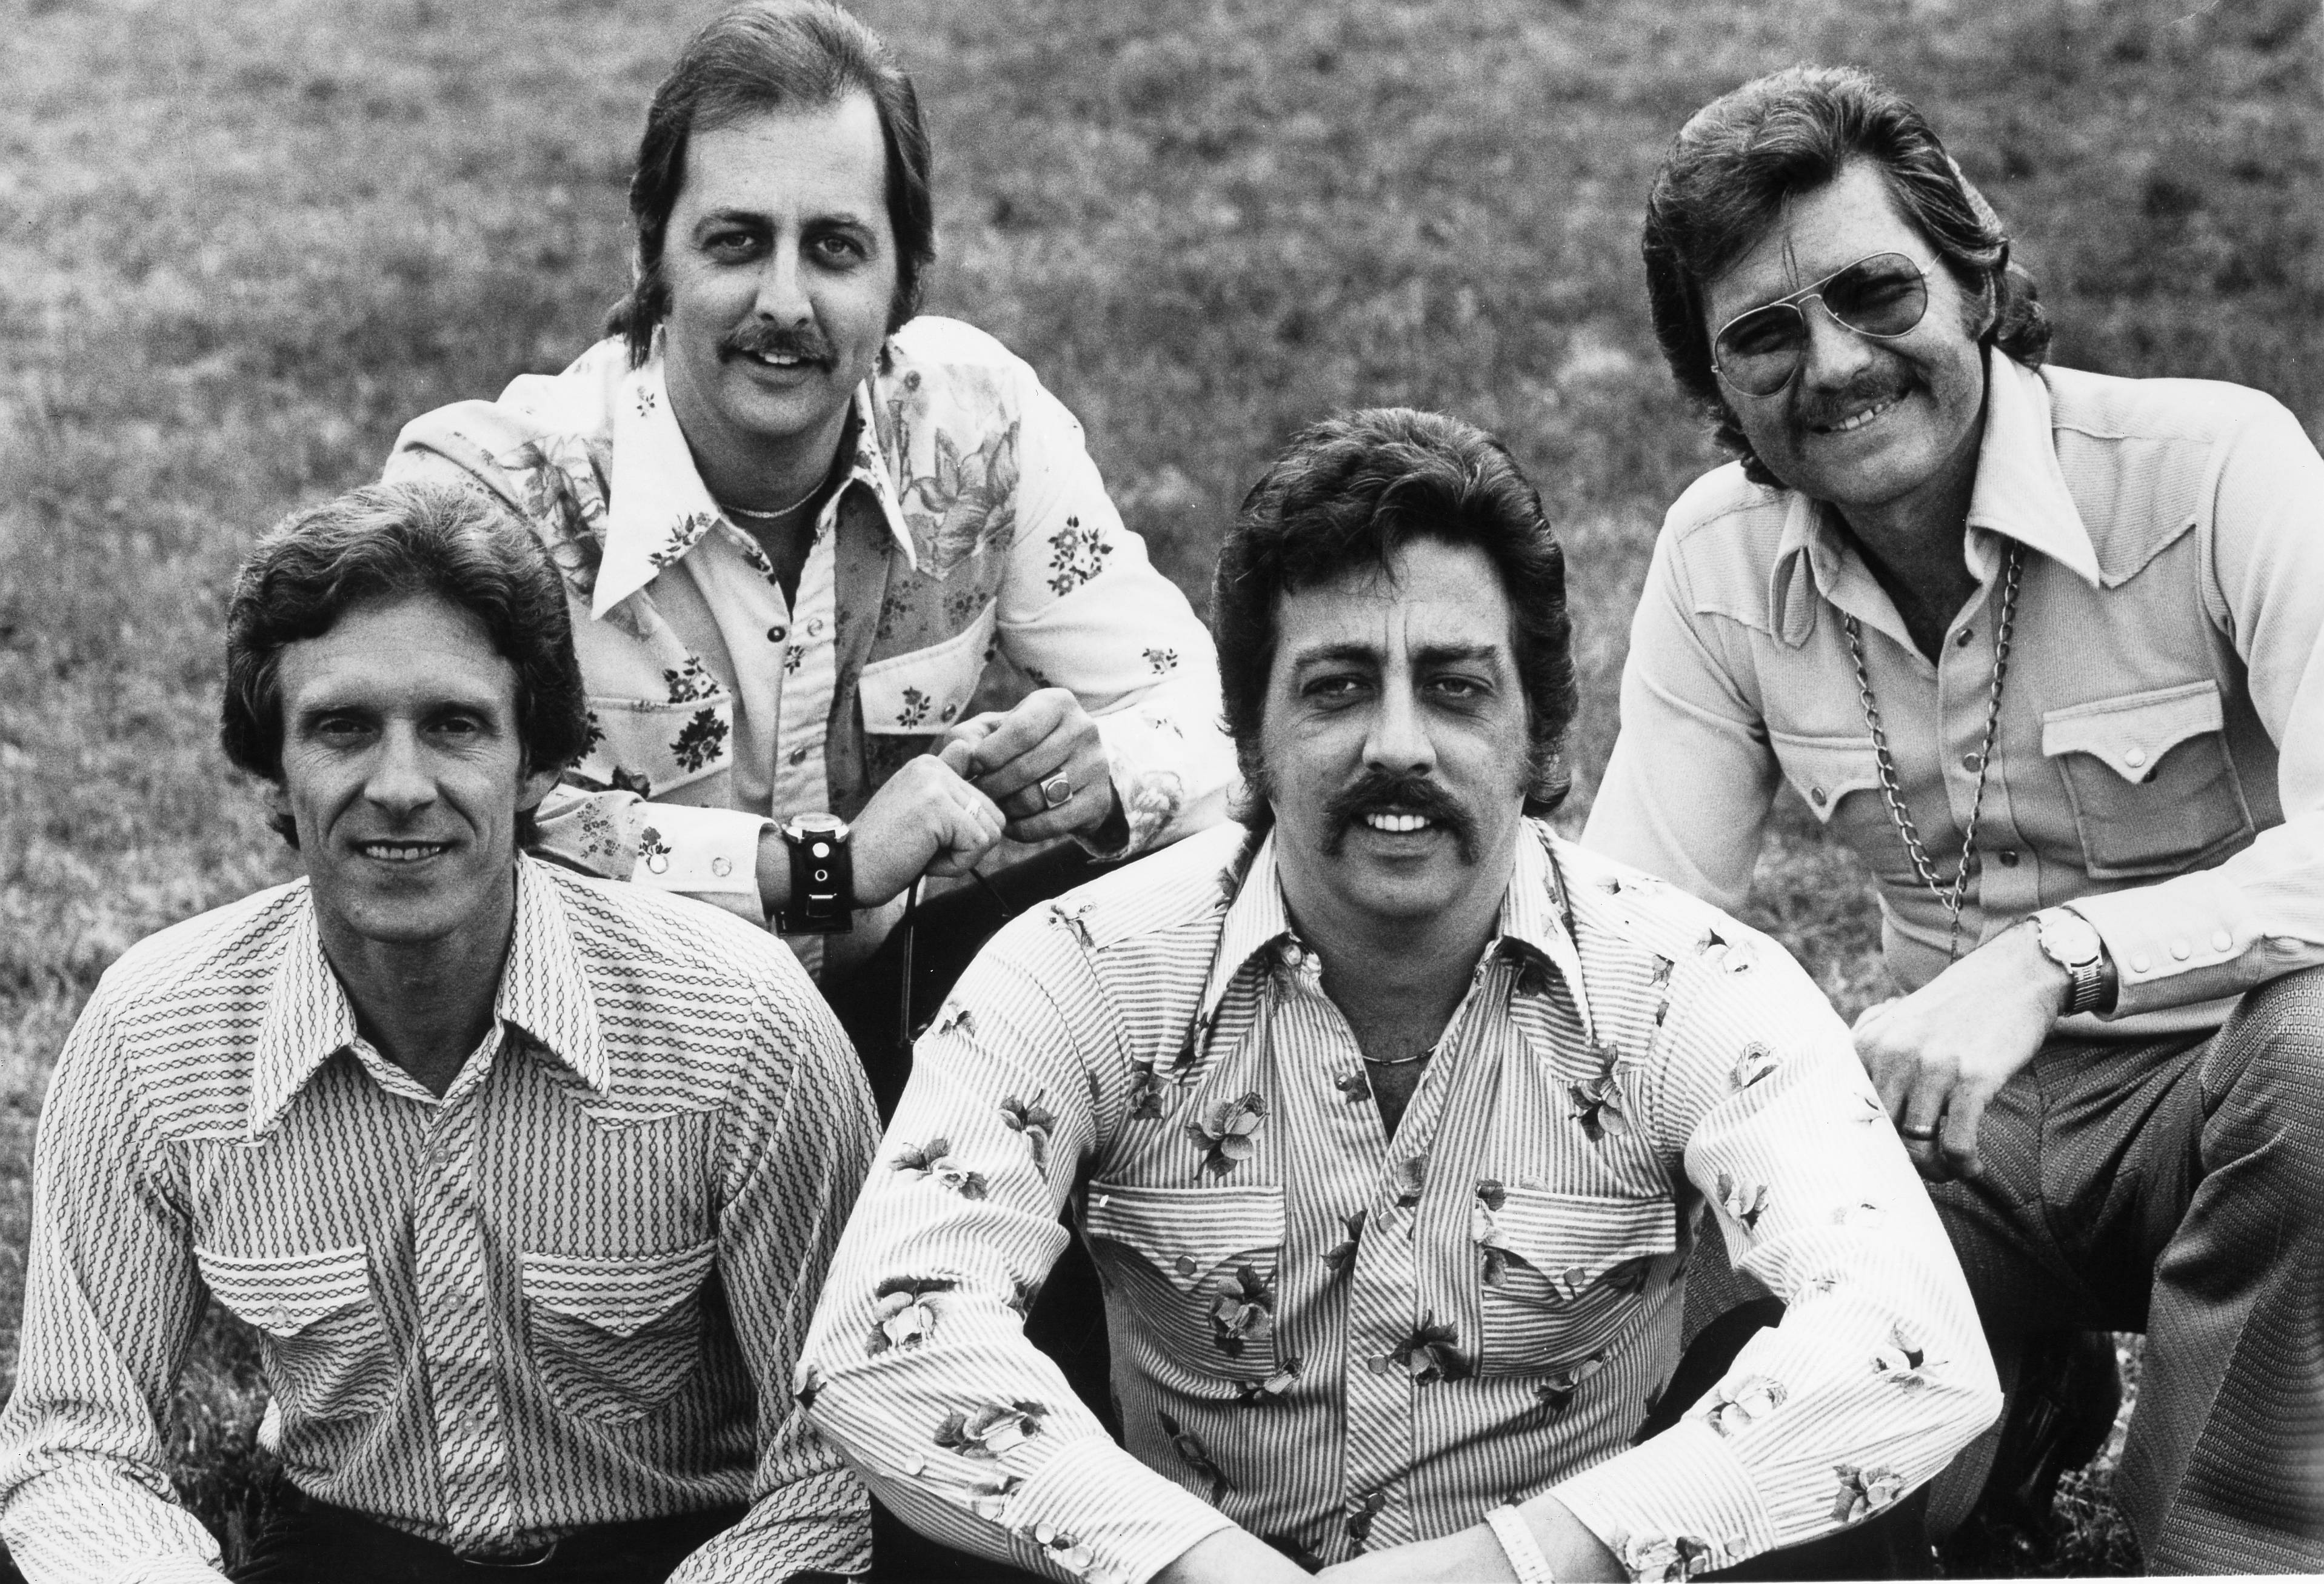 The Statler Brothers, authors of "Flowers on the Wall" and "Bed of Roses" from left to right: Phil Balsley, Don Reid, Harold Reid and Lew DeWitt | Photo: Gems/Redferns